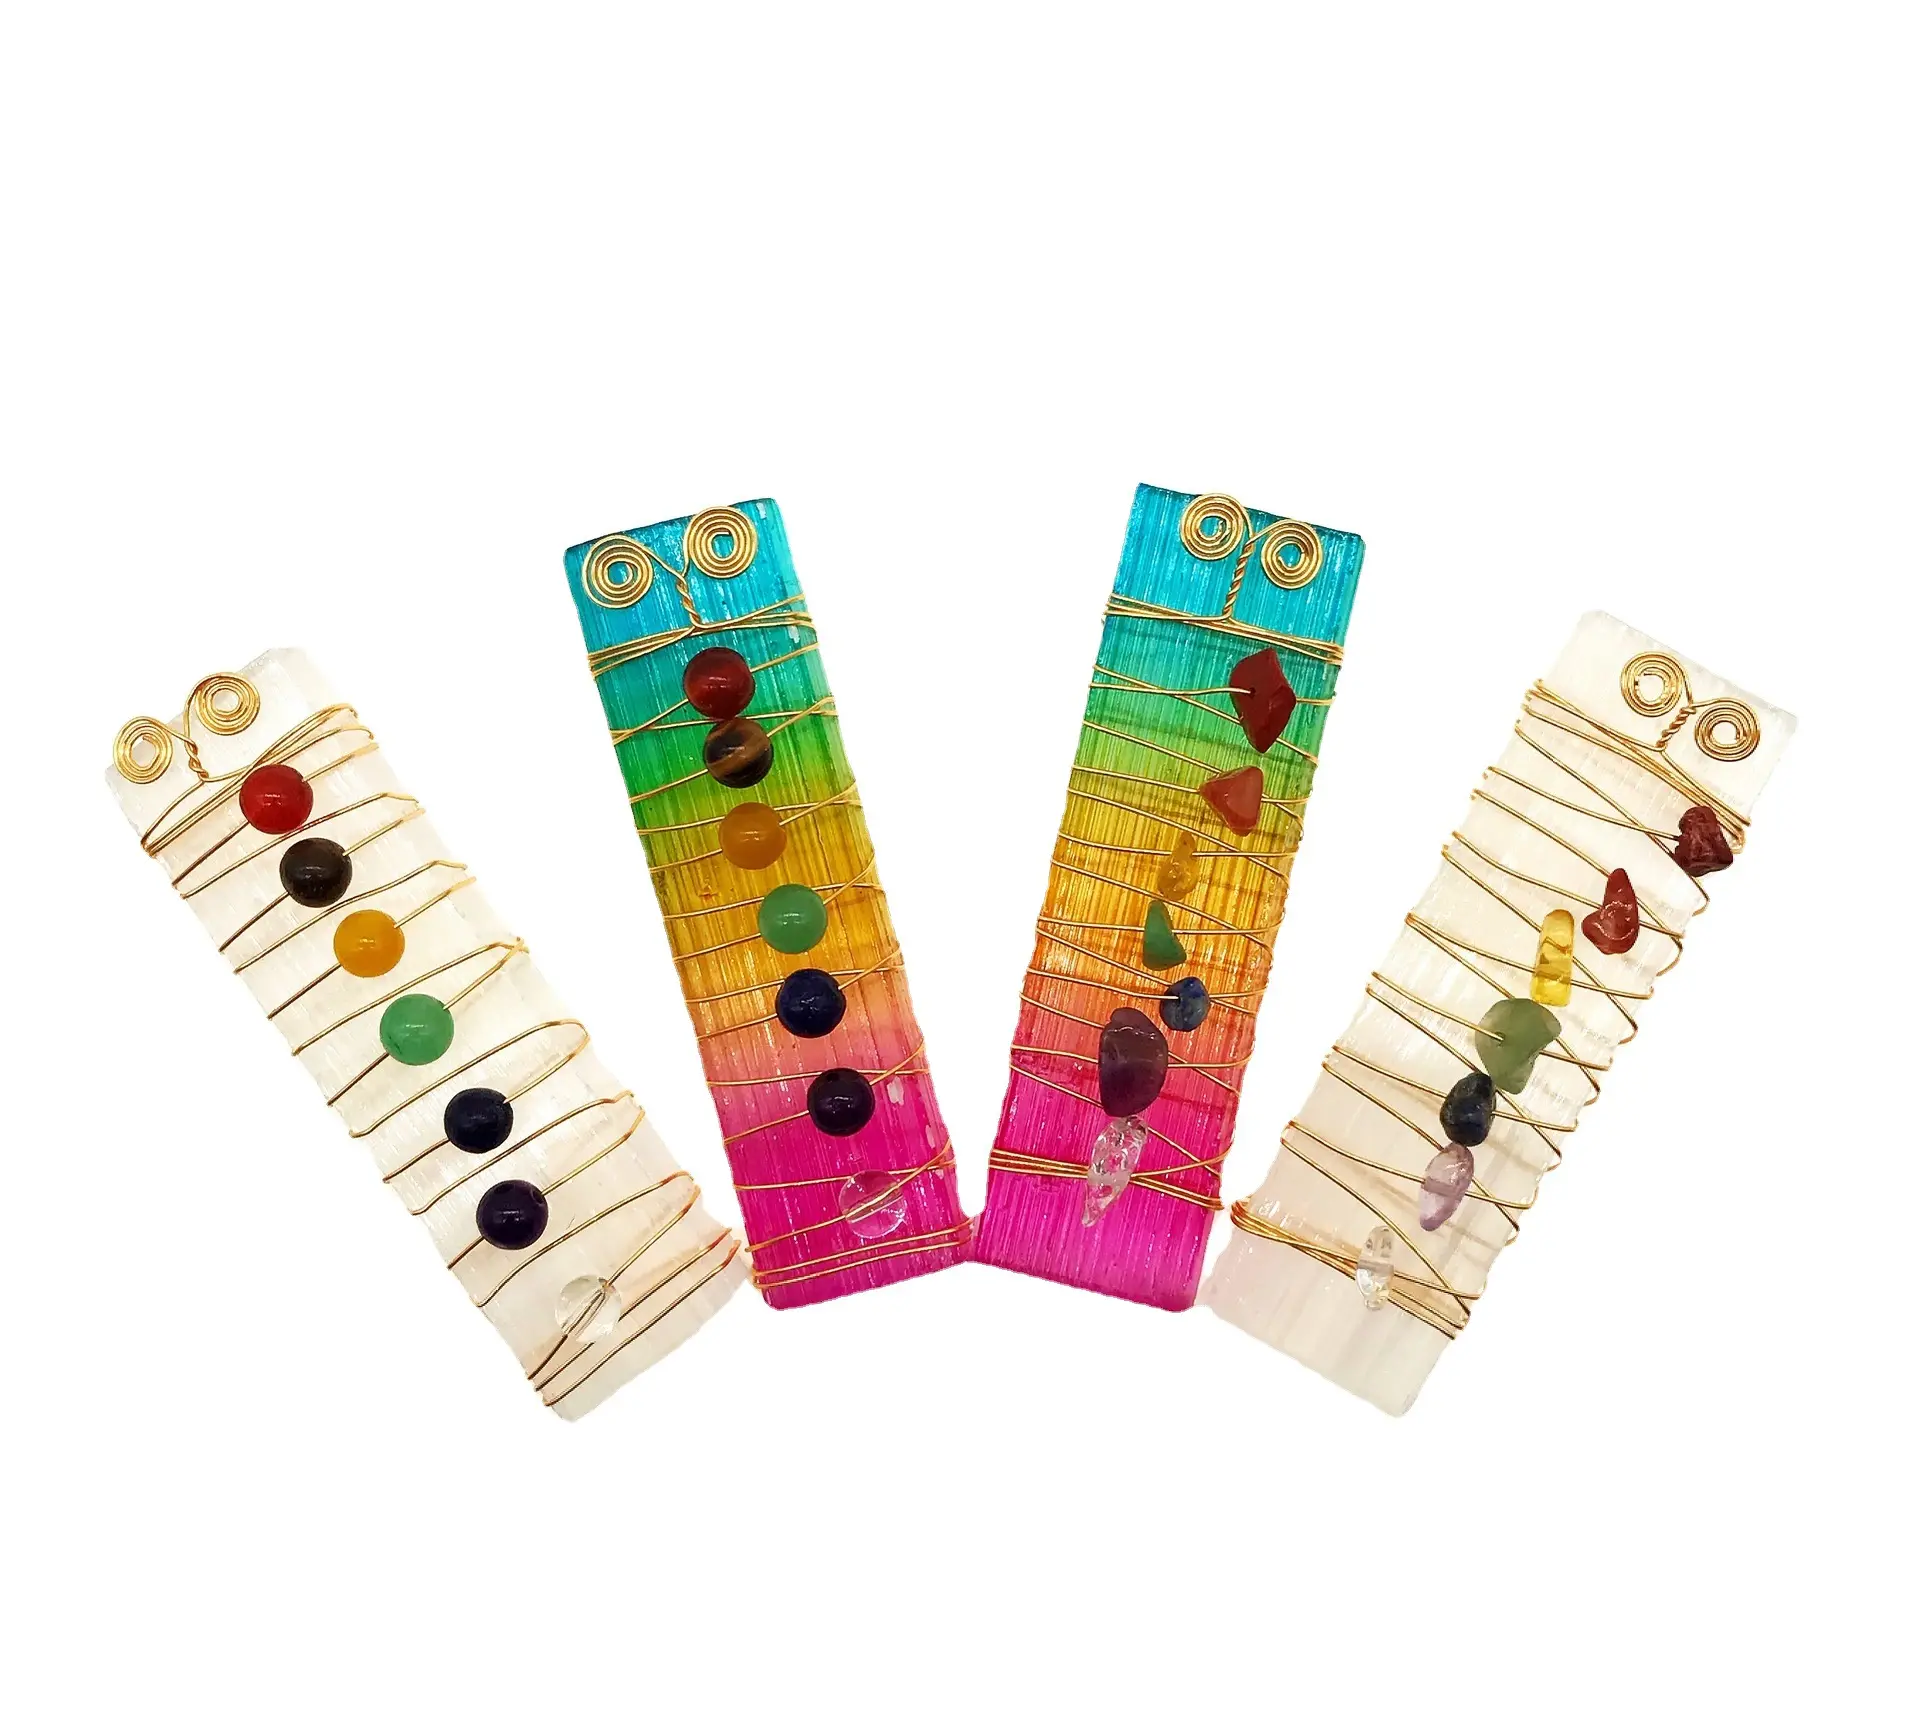 Natural Gypsum Crystal Irregular Colorful Square Strip Wrapped Seven Chakra Healing Stick Yoga Stone Ornaments For Lucky